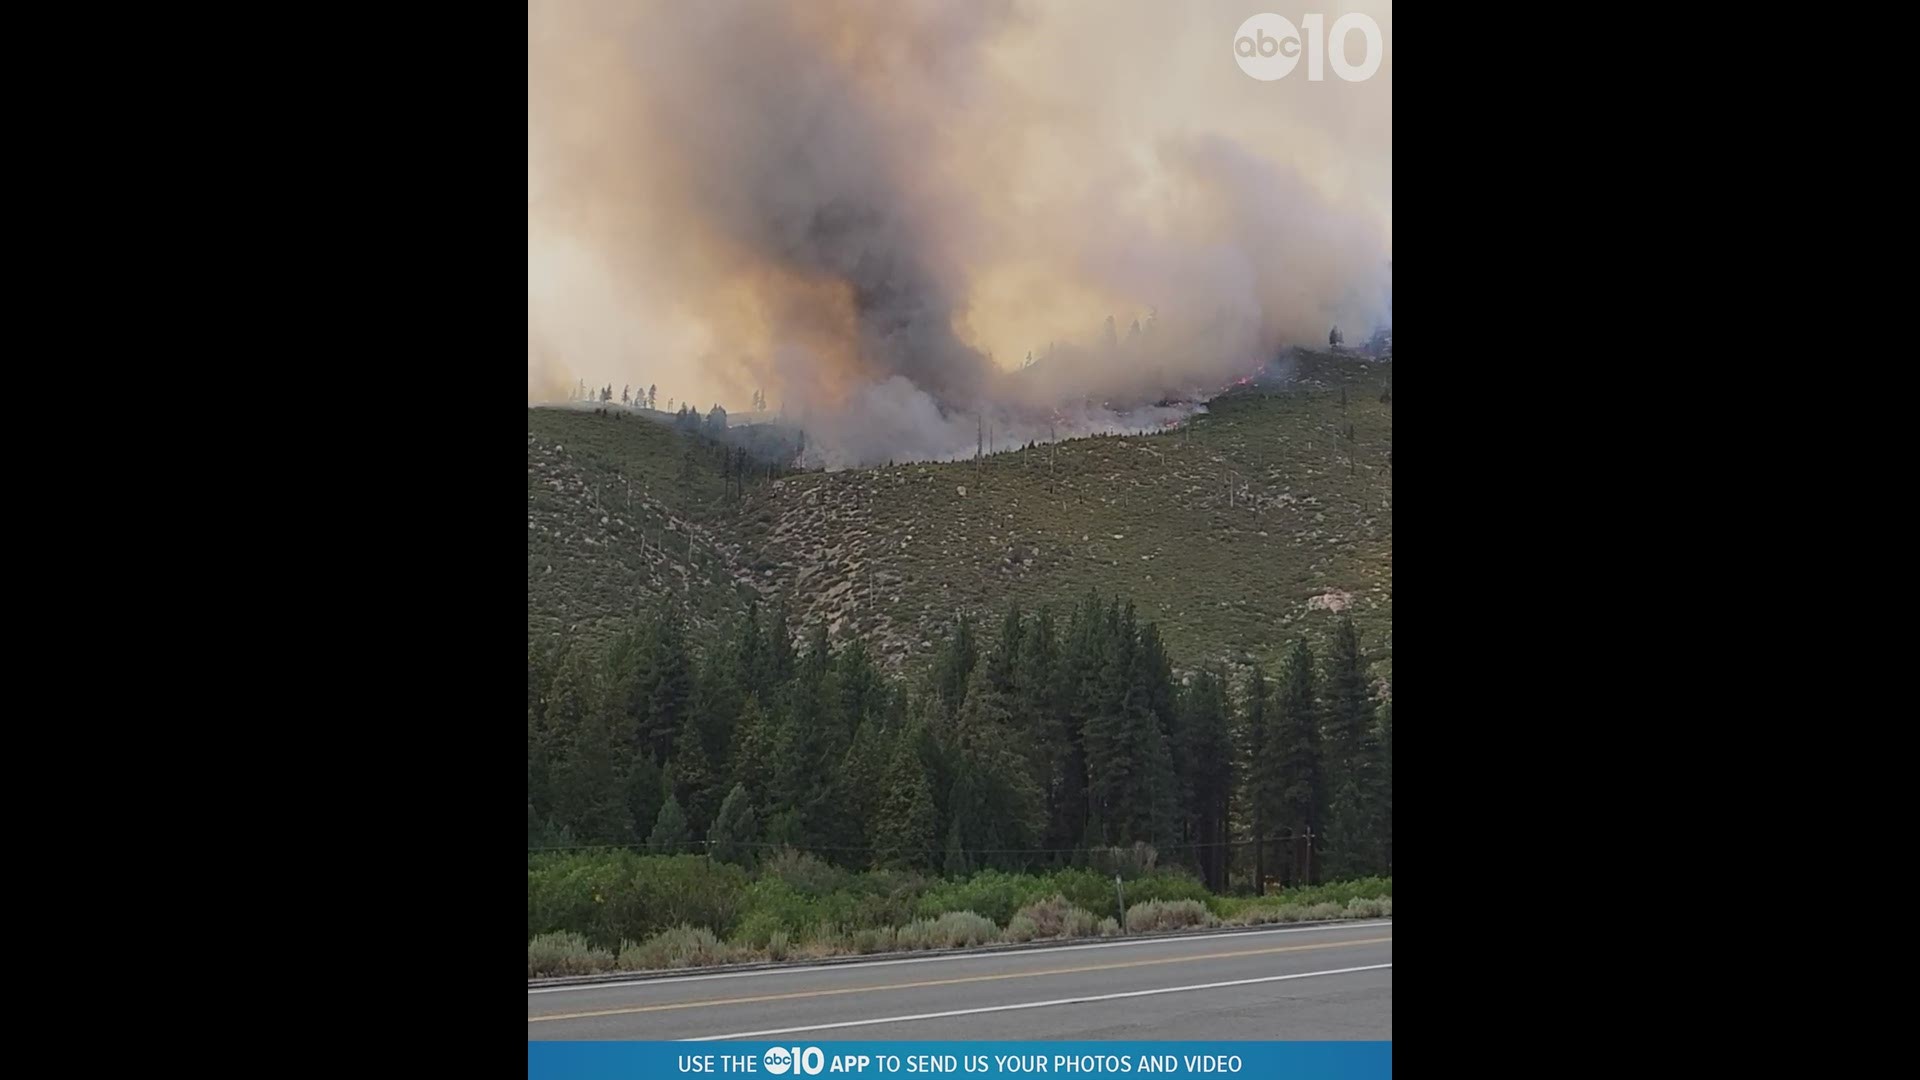 The Tamarack Fire burning south of Lake Tahoe near Markleeville is producing extreme weather conditions. Video shows what looks like a rope tornado.